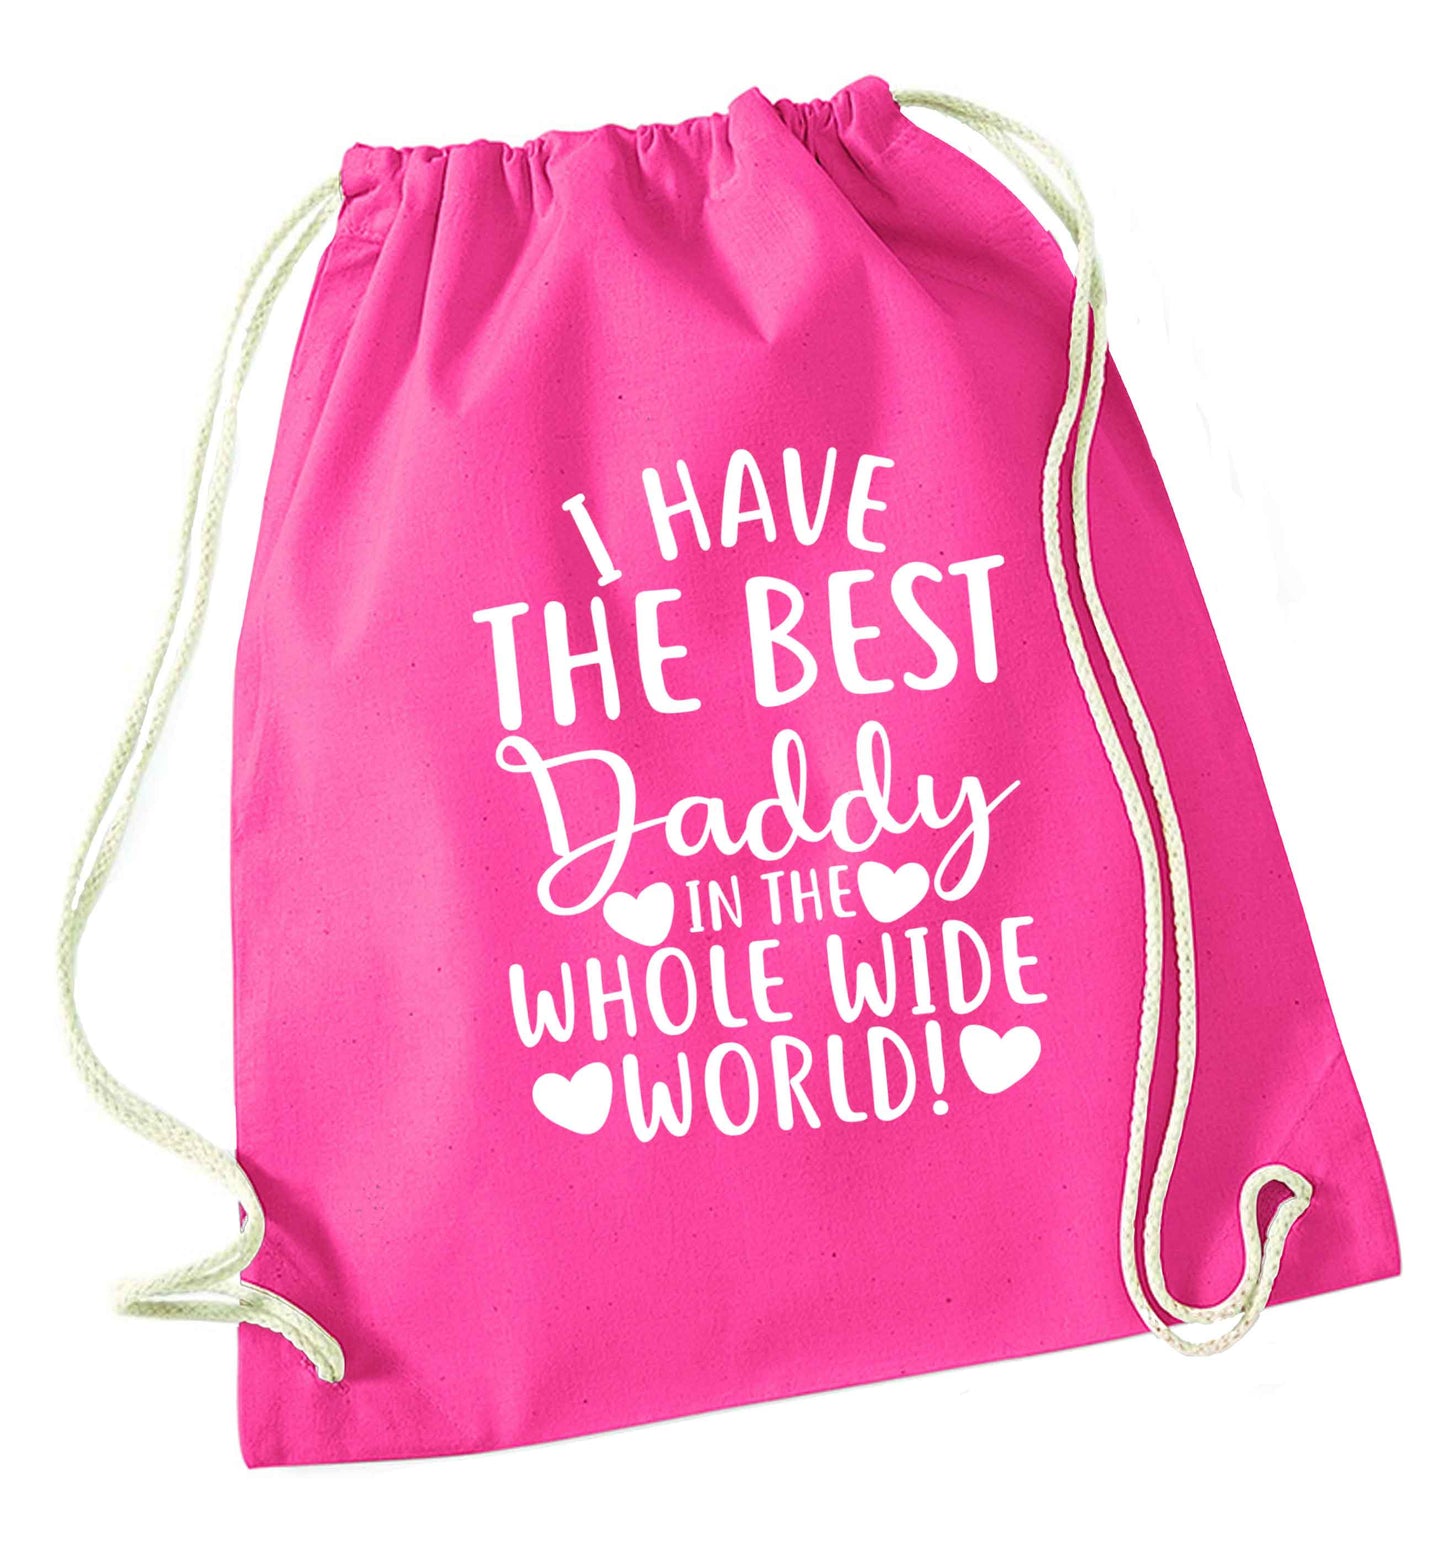 I have the best daddy in the whole wide world pink drawstring bag